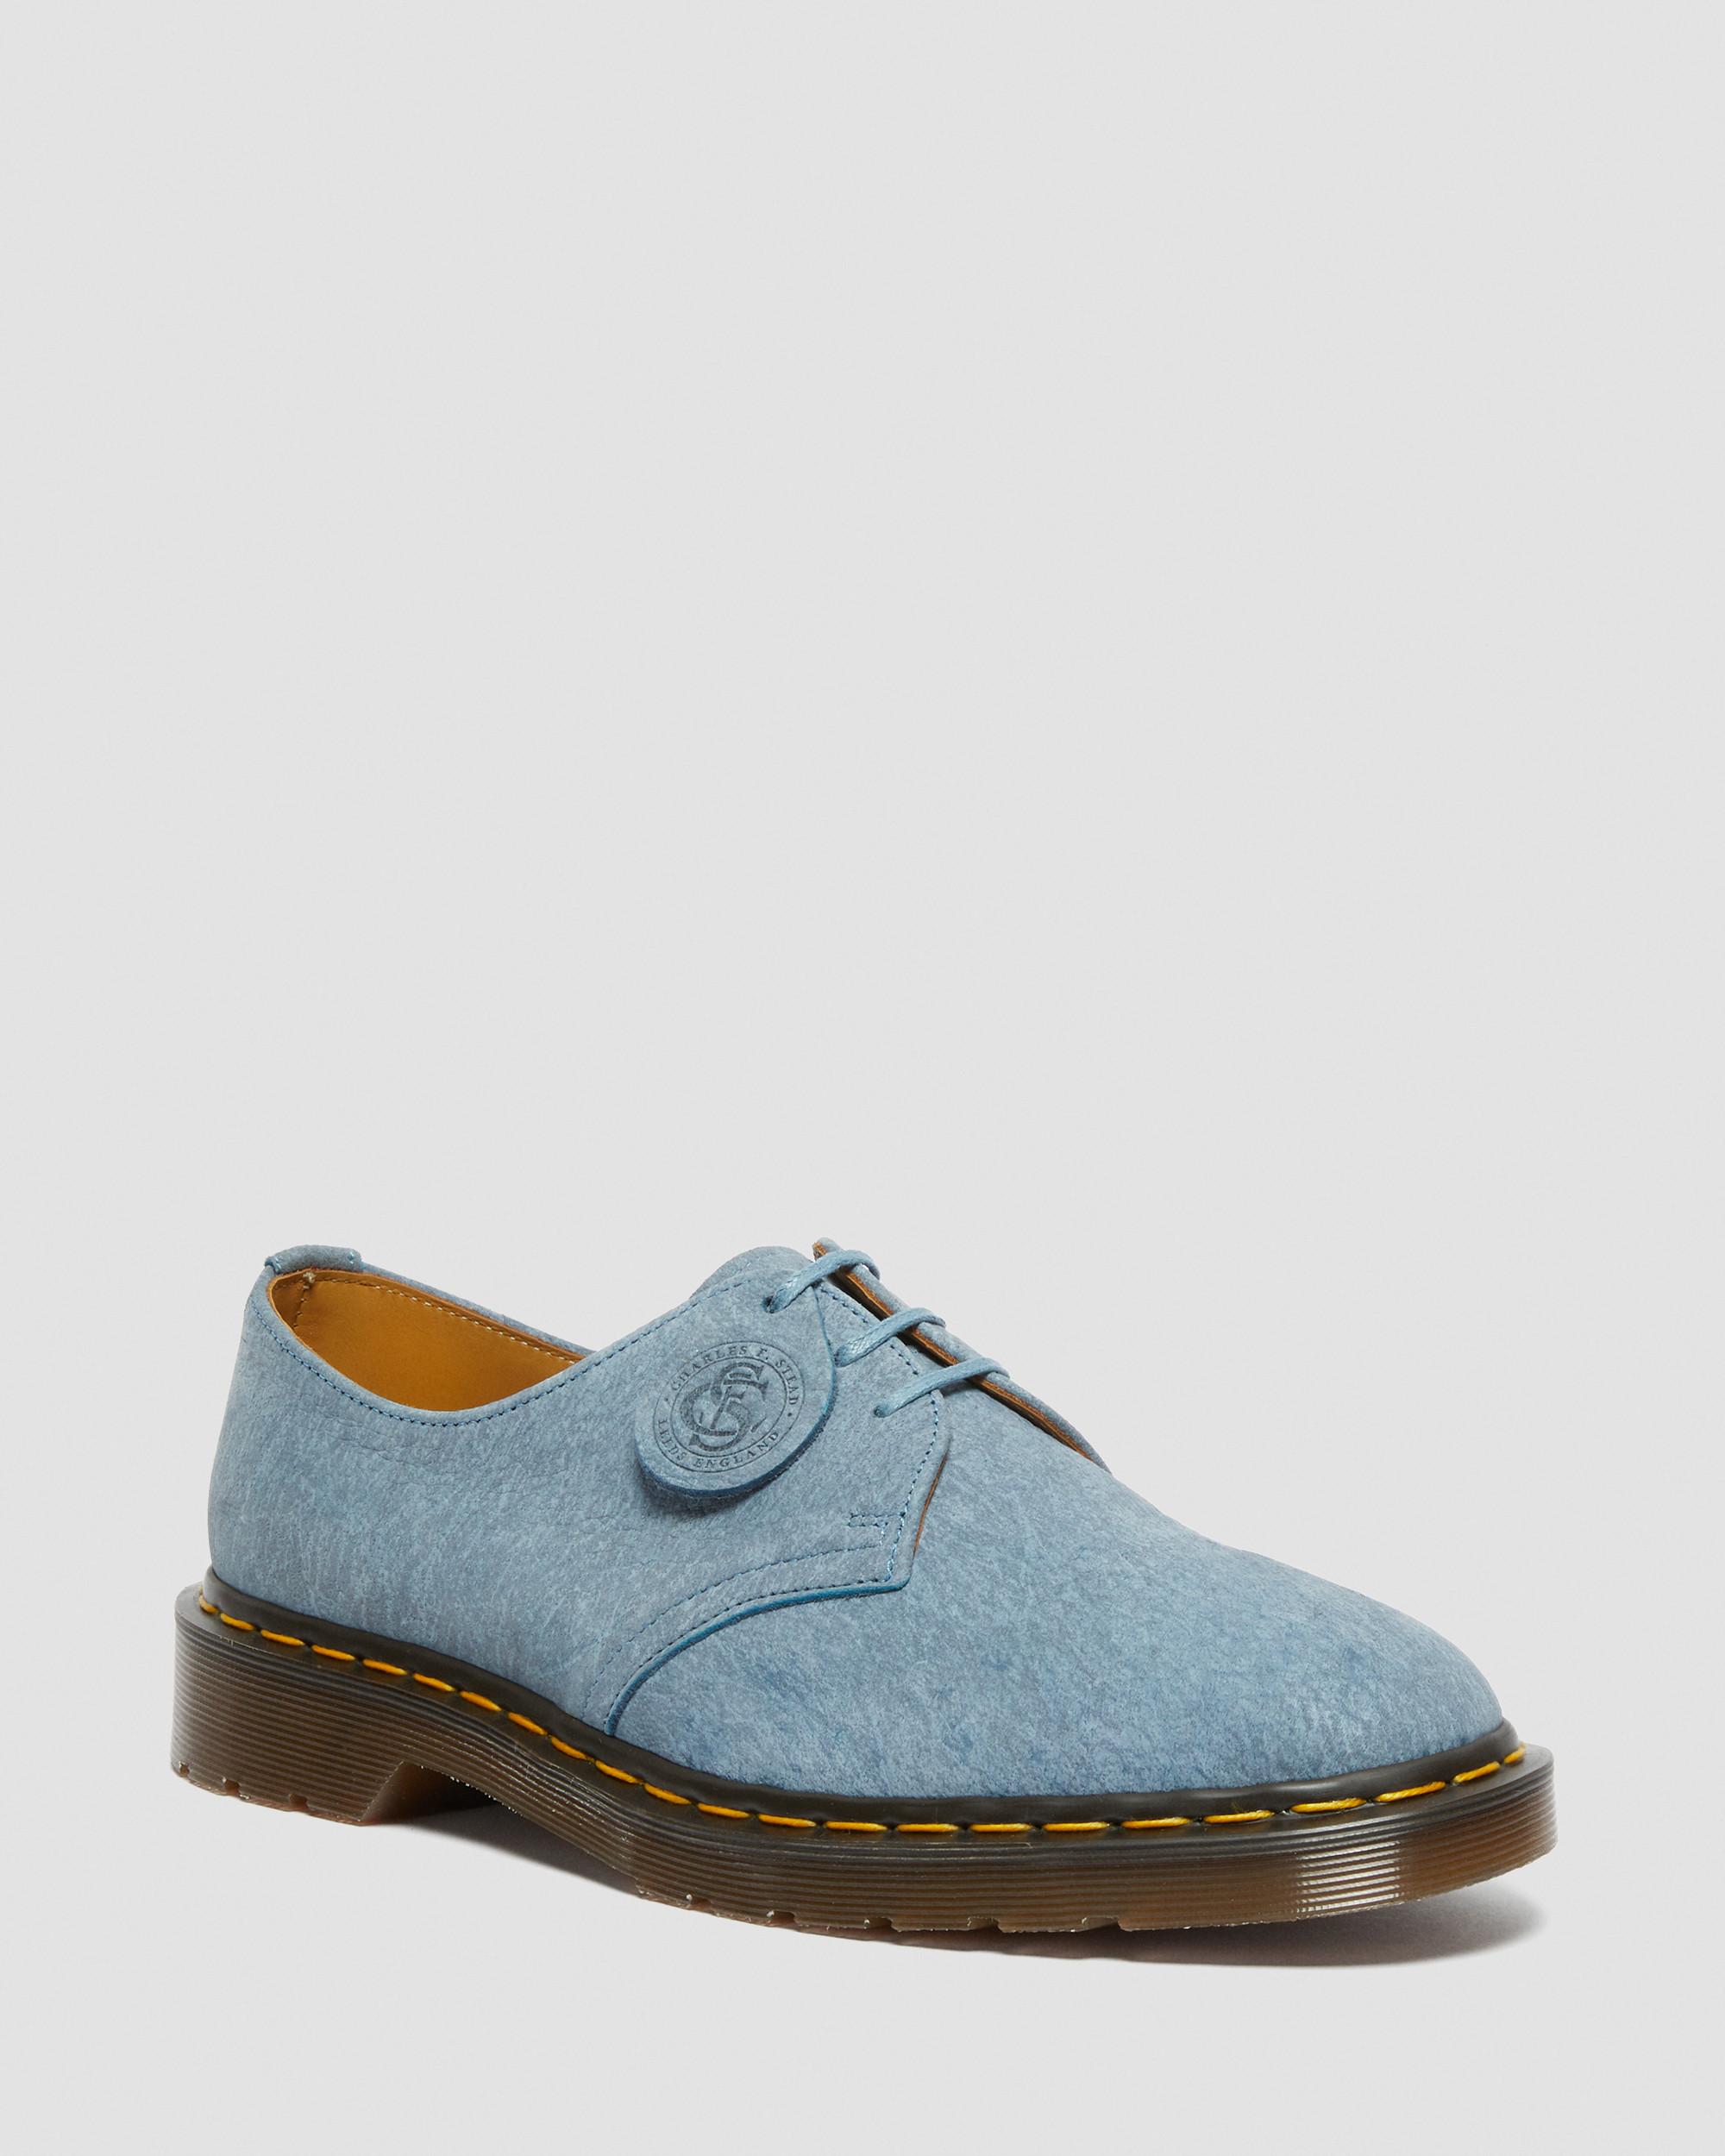 1461 Made in England Nubuck Leather Oxford Shoes, Blue | Dr. Martens